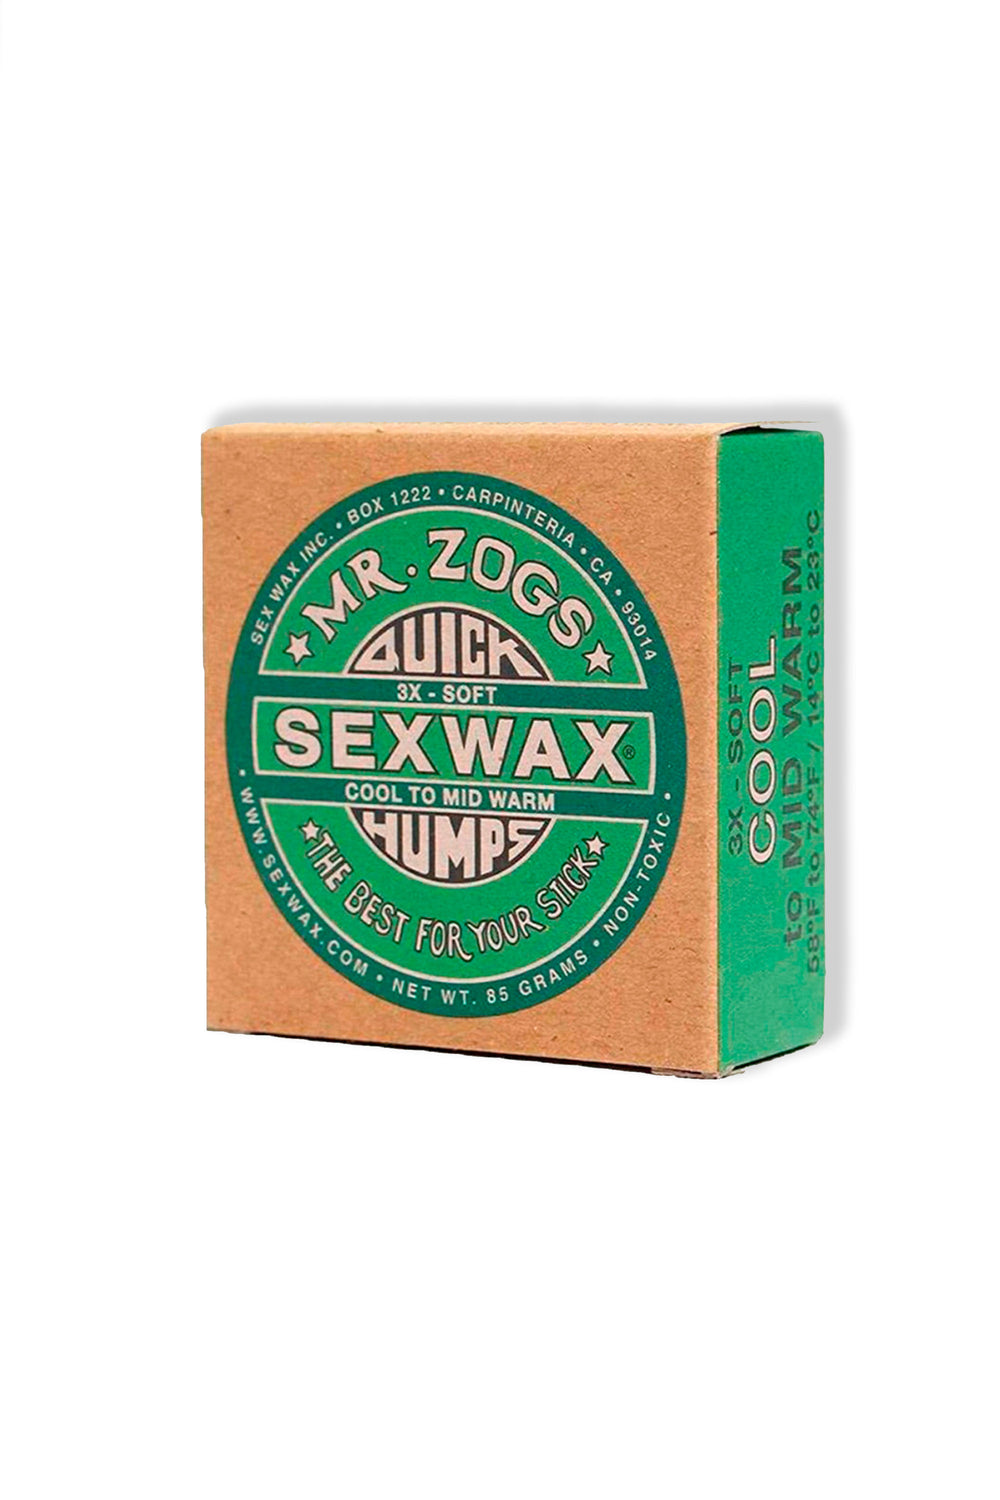 Mr. Zogs Sex Wax Air Freshener 3-Pack – Strictly Hardcore Surf